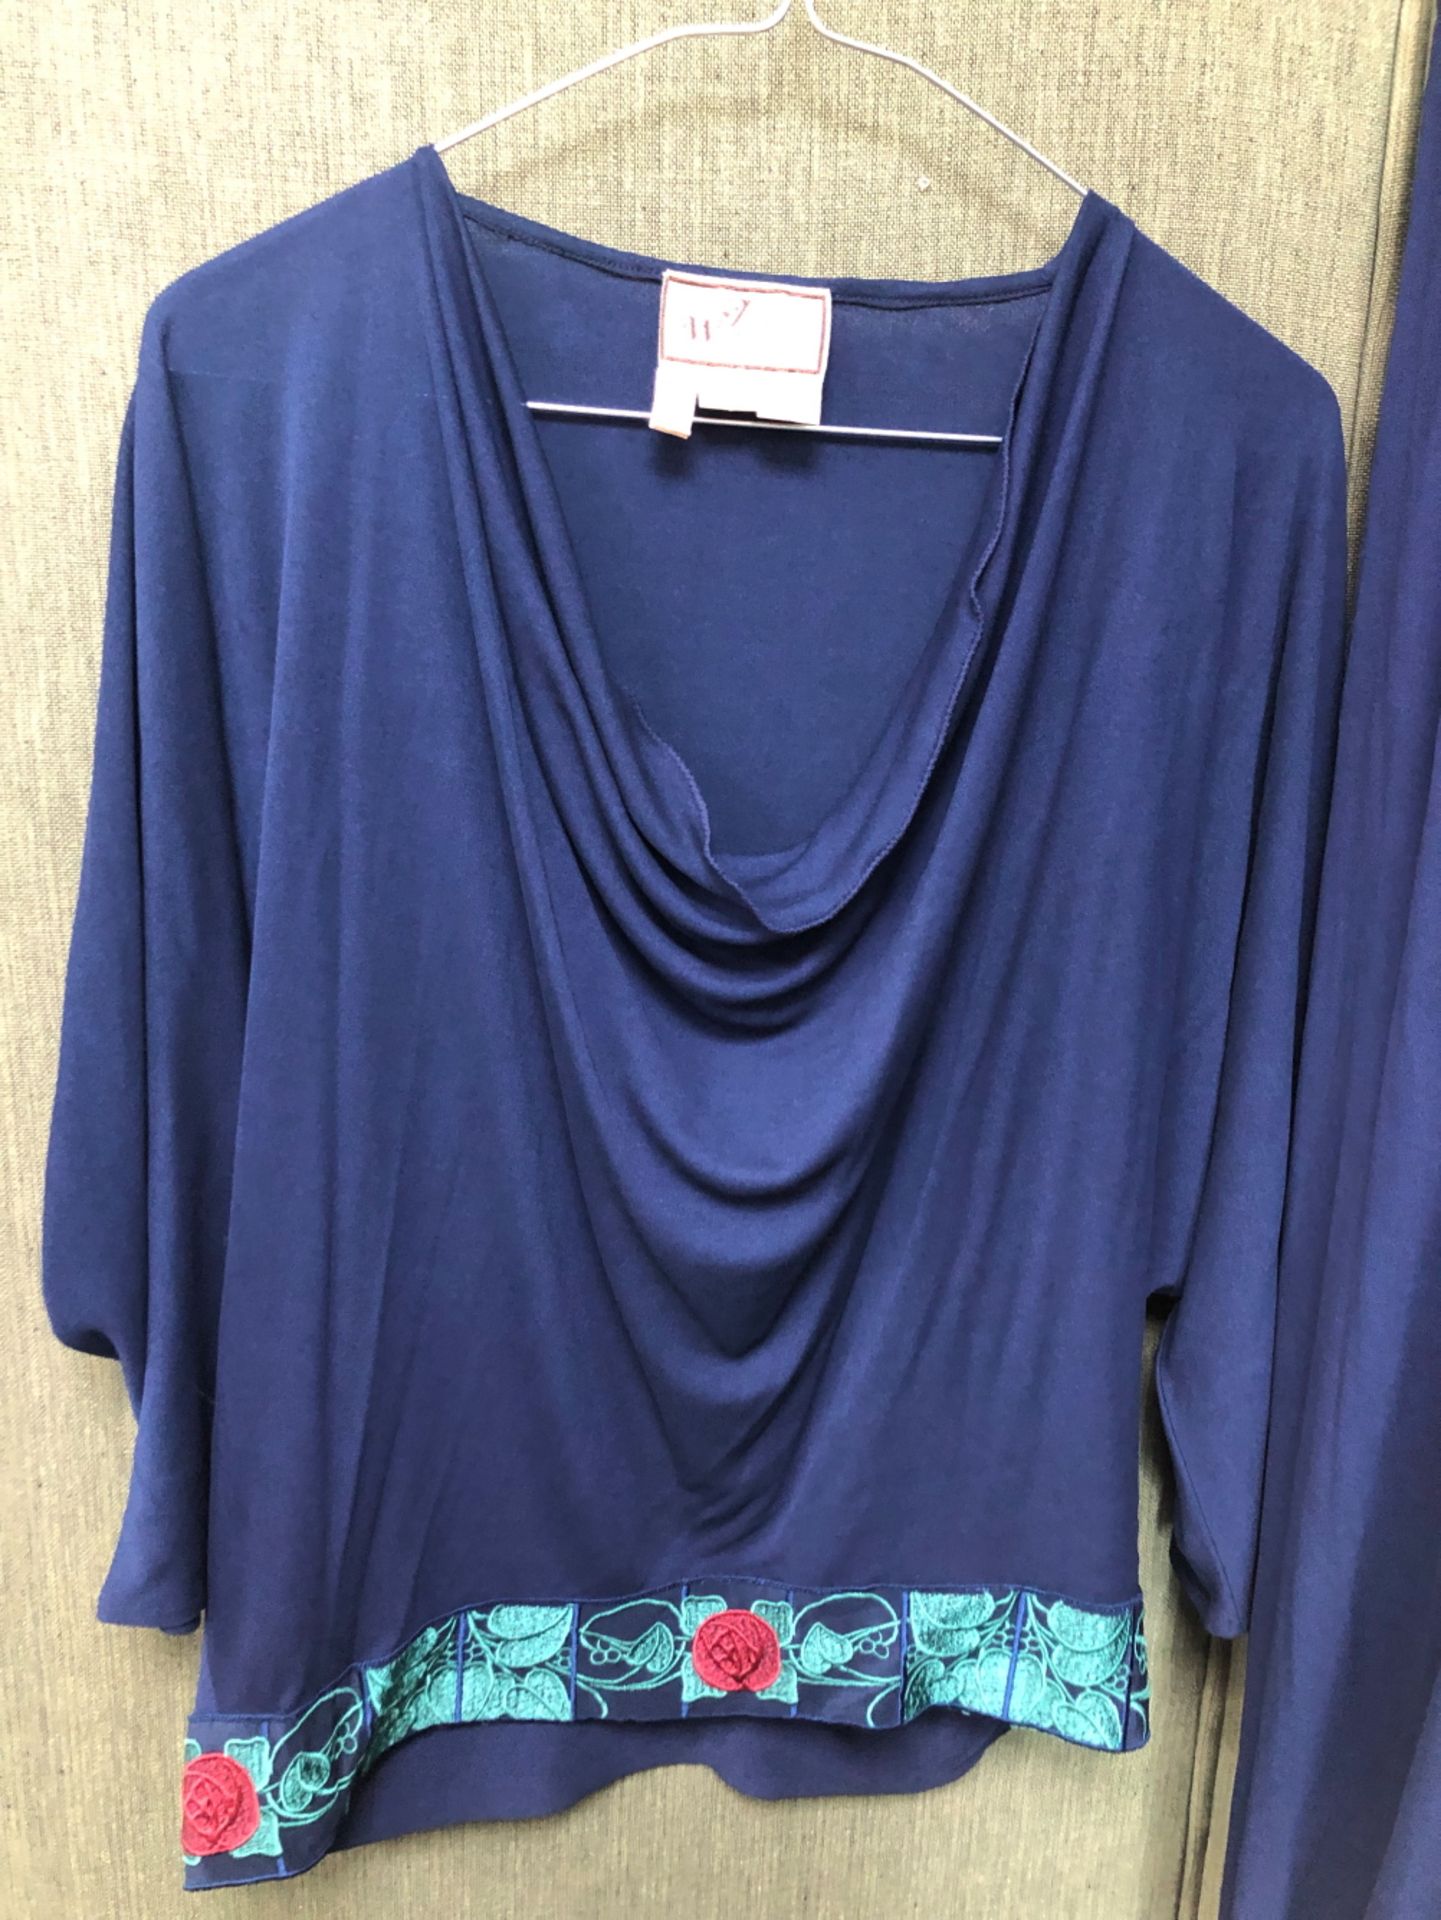 A JANICE WAINWRIGHT UK 14 NAVY AND FLORAL SHEER TUNIC TIE UP TOP WITH MATCHING 3/4 SLEEVE TOP - Image 2 of 11